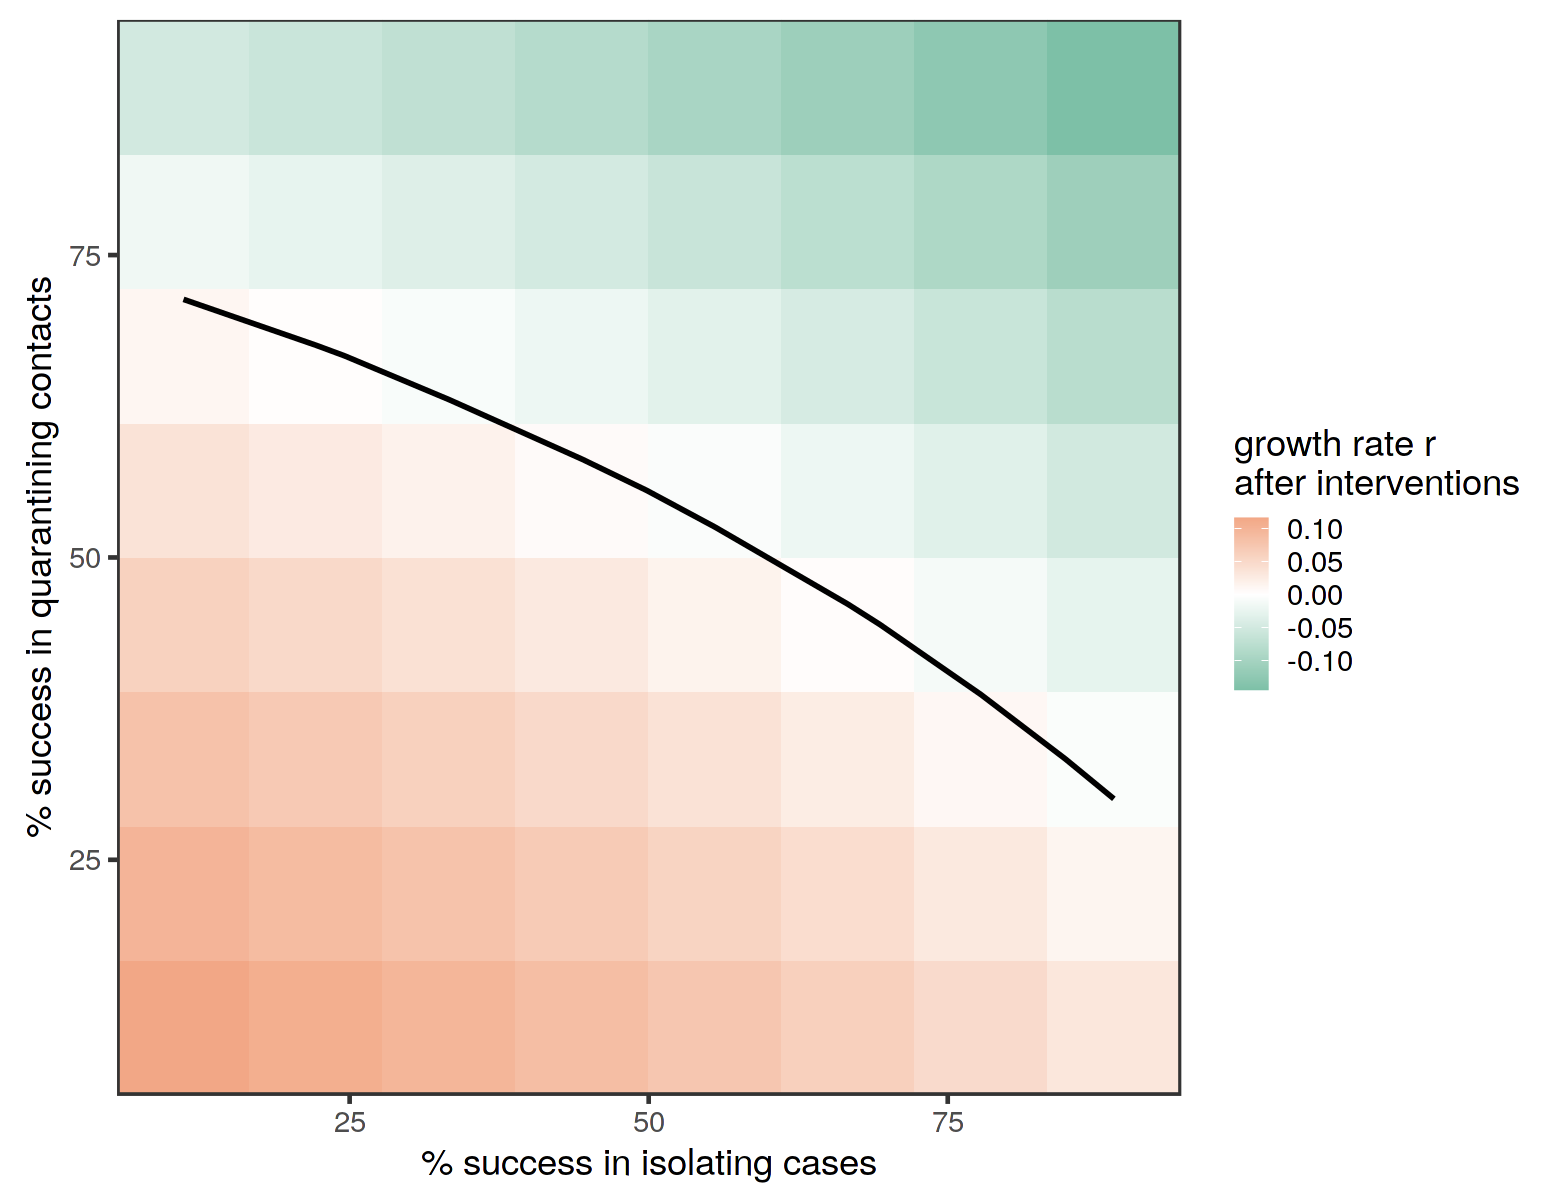 lowering the growth rate with interventions